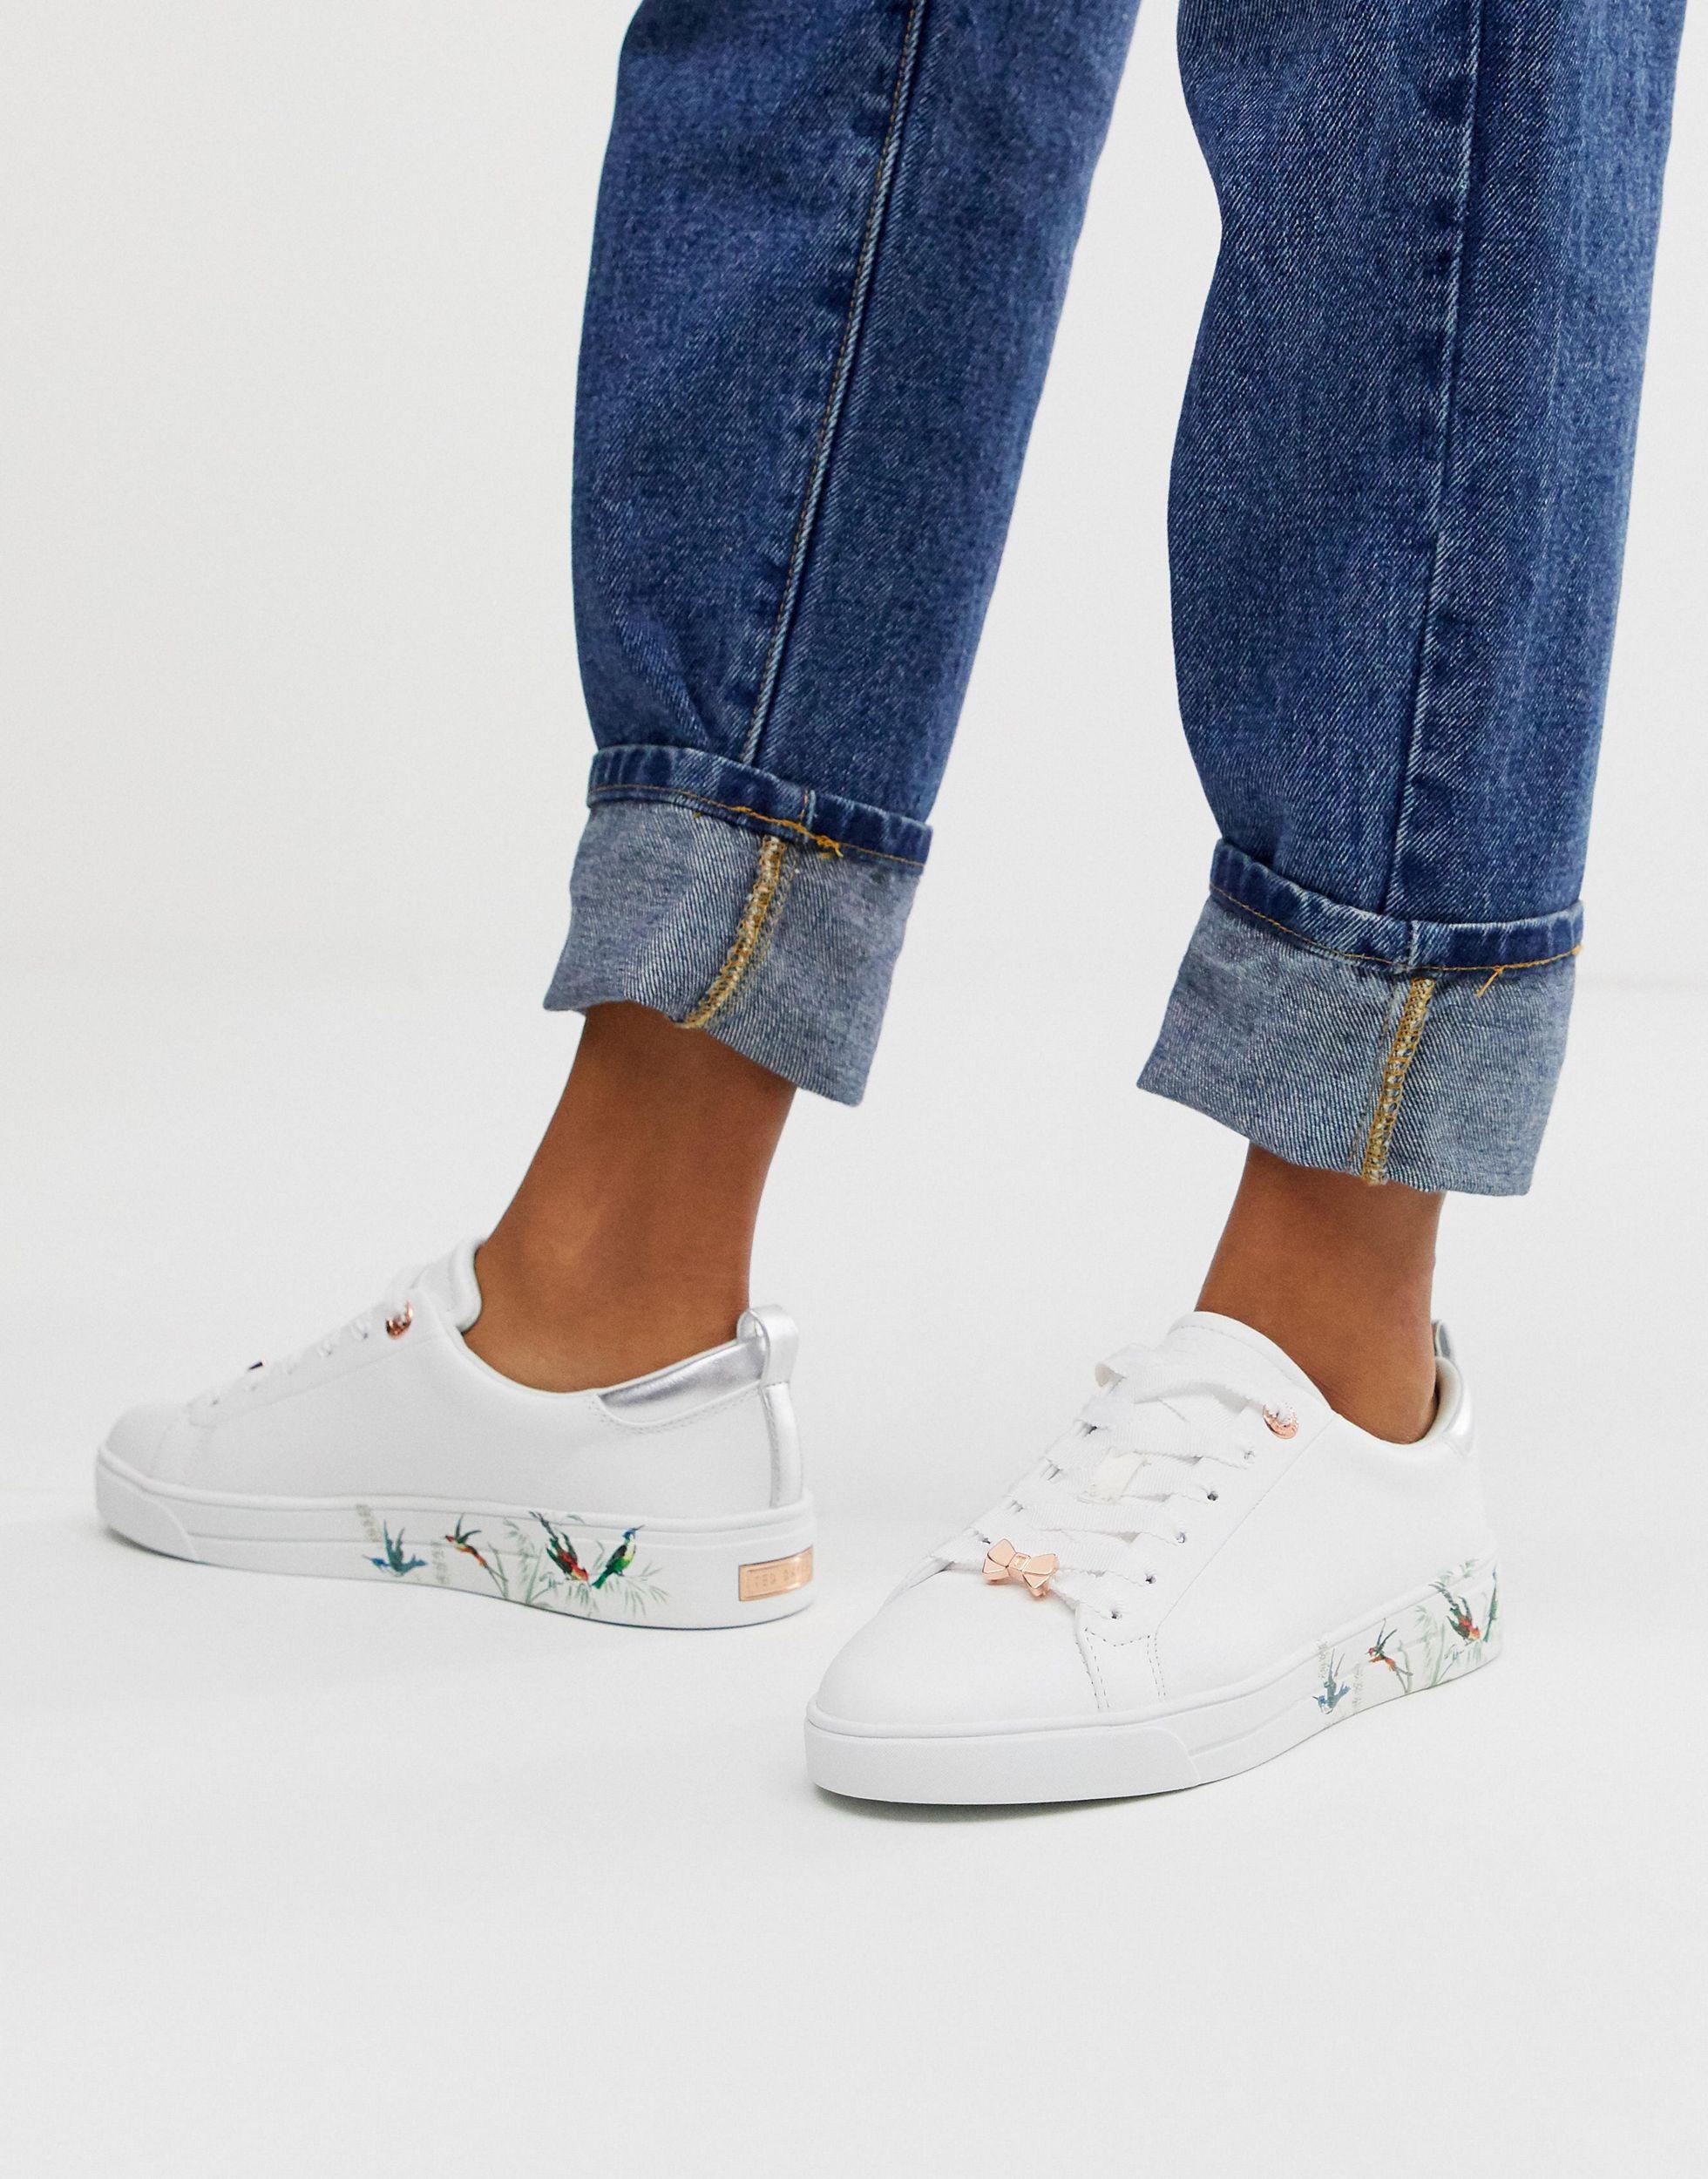 Ted Baker White Leather Floral Sole Sneakers | Lyst